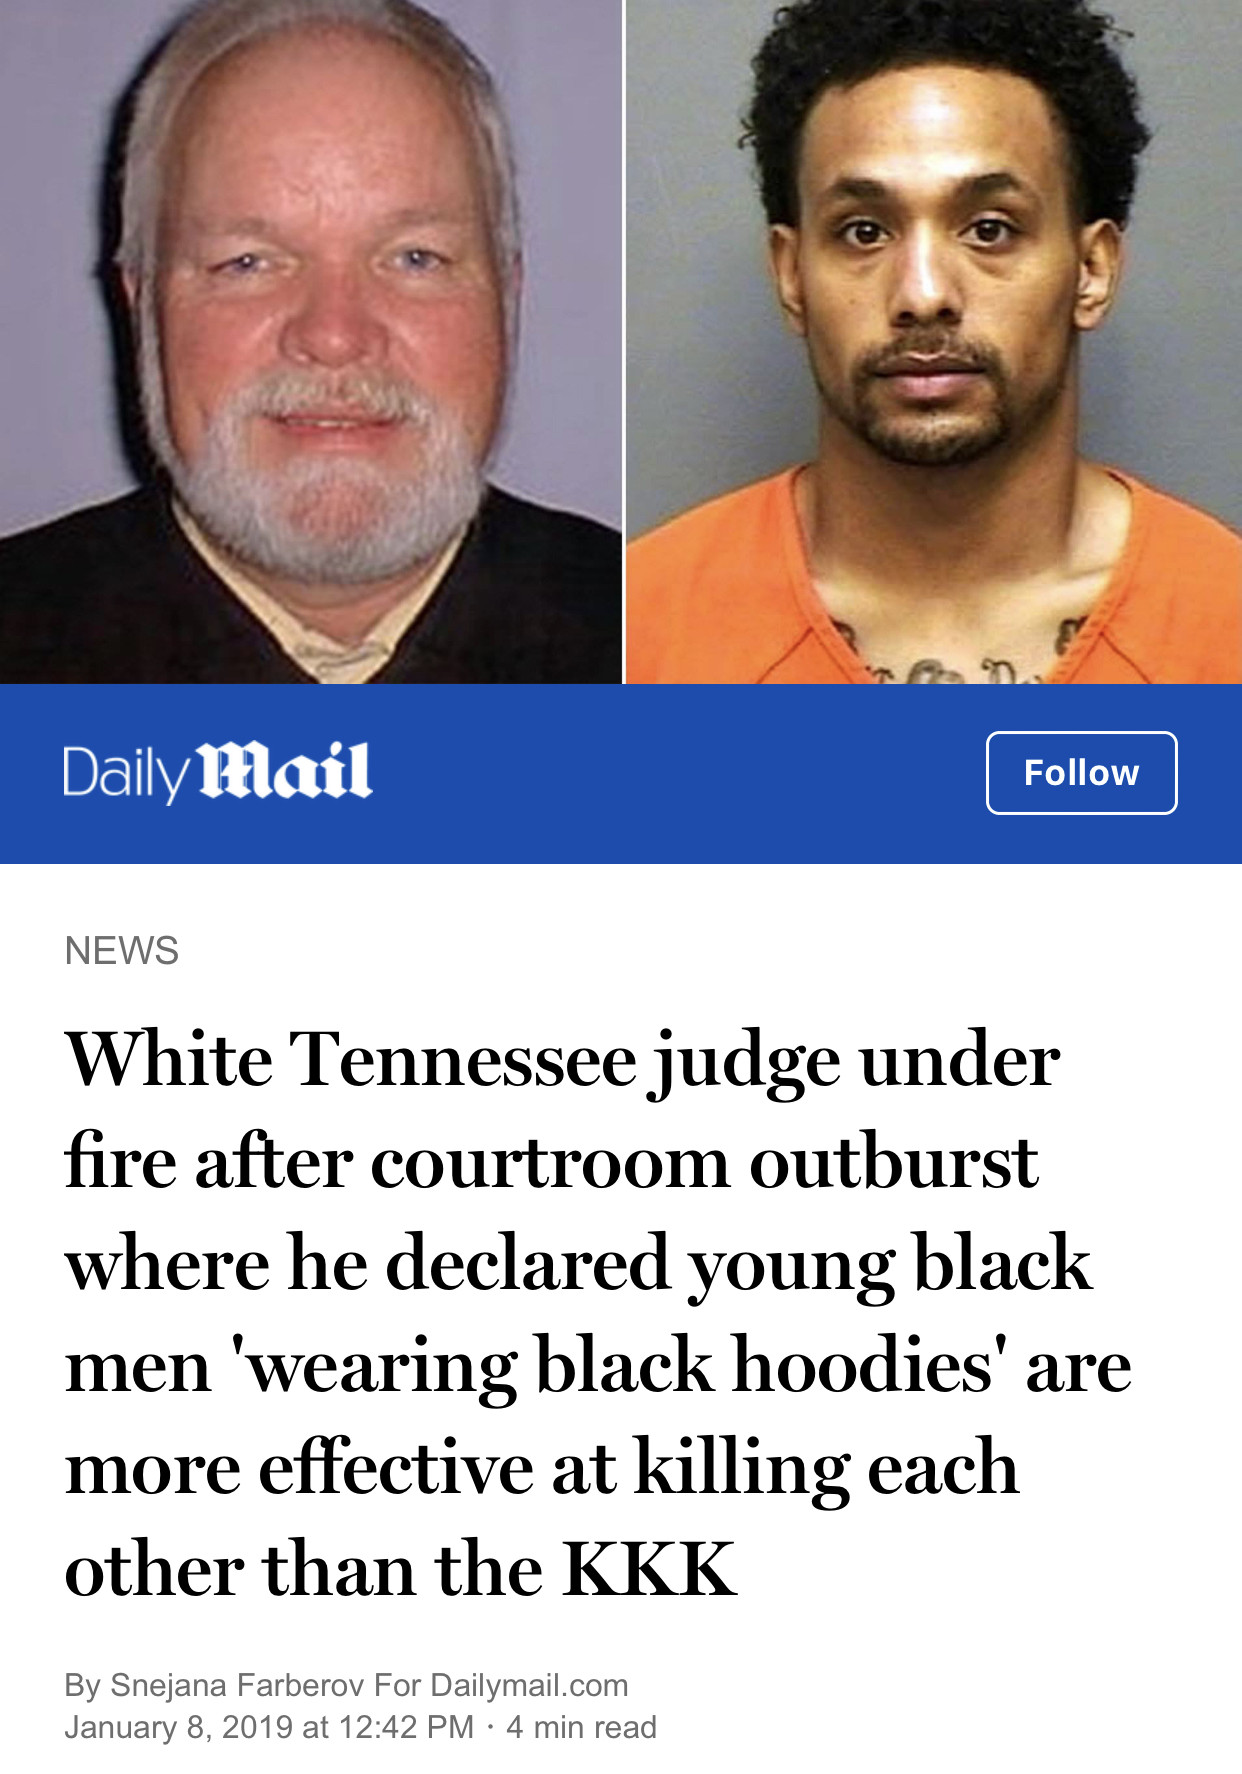 political meme institute of culinary education - Daily Mail News White Tennessee judge under fire after courtroom outburst where he declared young black men 'wearing black hoodies' are more effective at killing each other than the Kkk By Snejana Farberov 